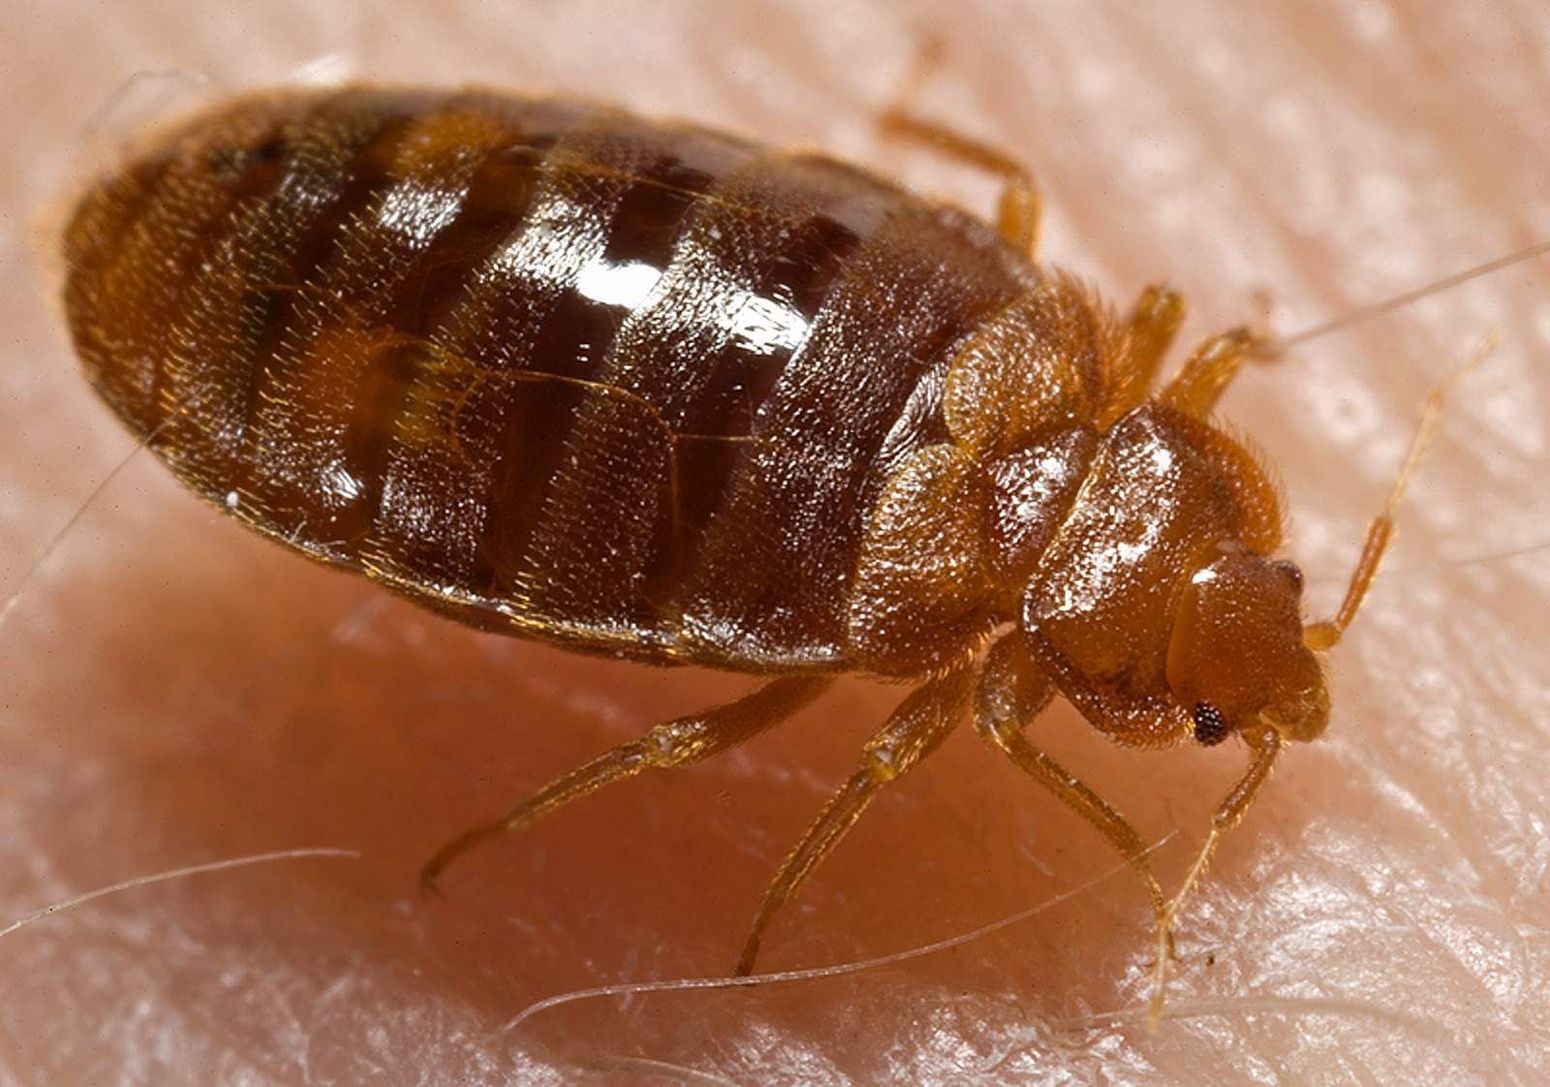 Experts Concerned As 'Bed Bug Epidemic' Spreads Across The Country